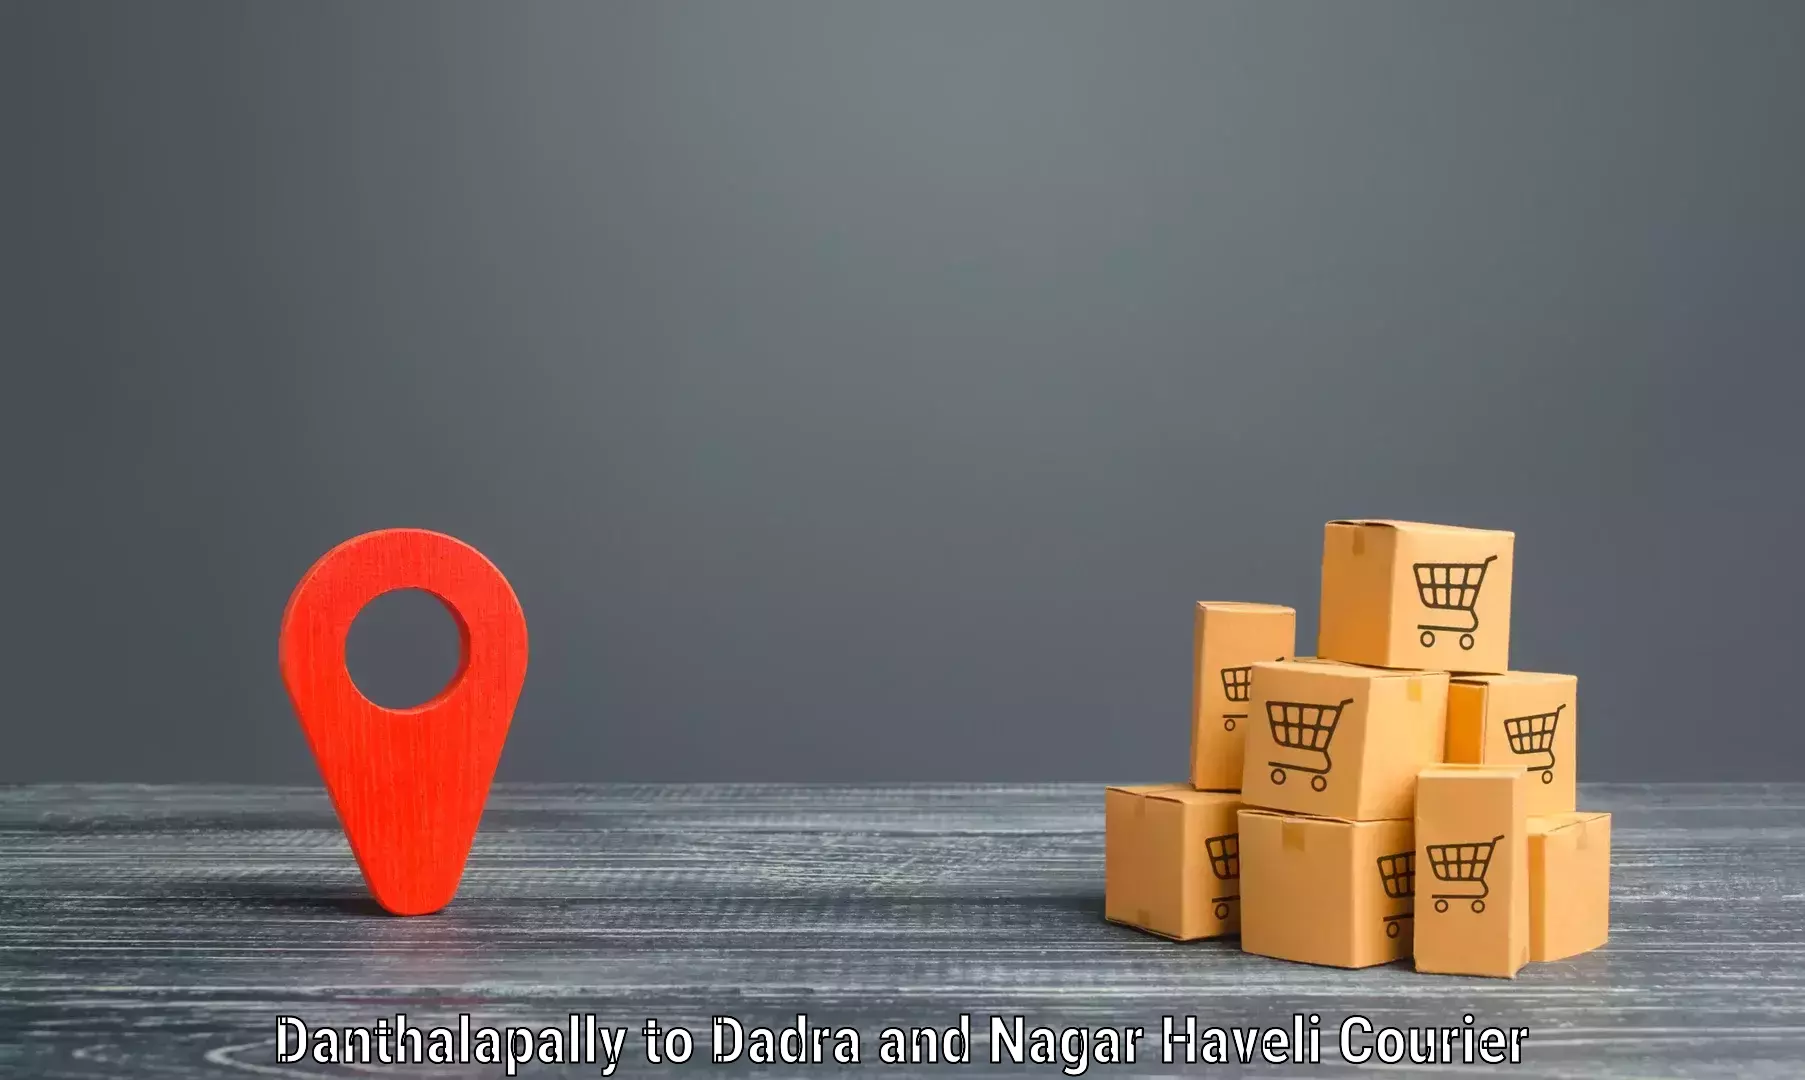 Cargo delivery service Danthalapally to Dadra and Nagar Haveli